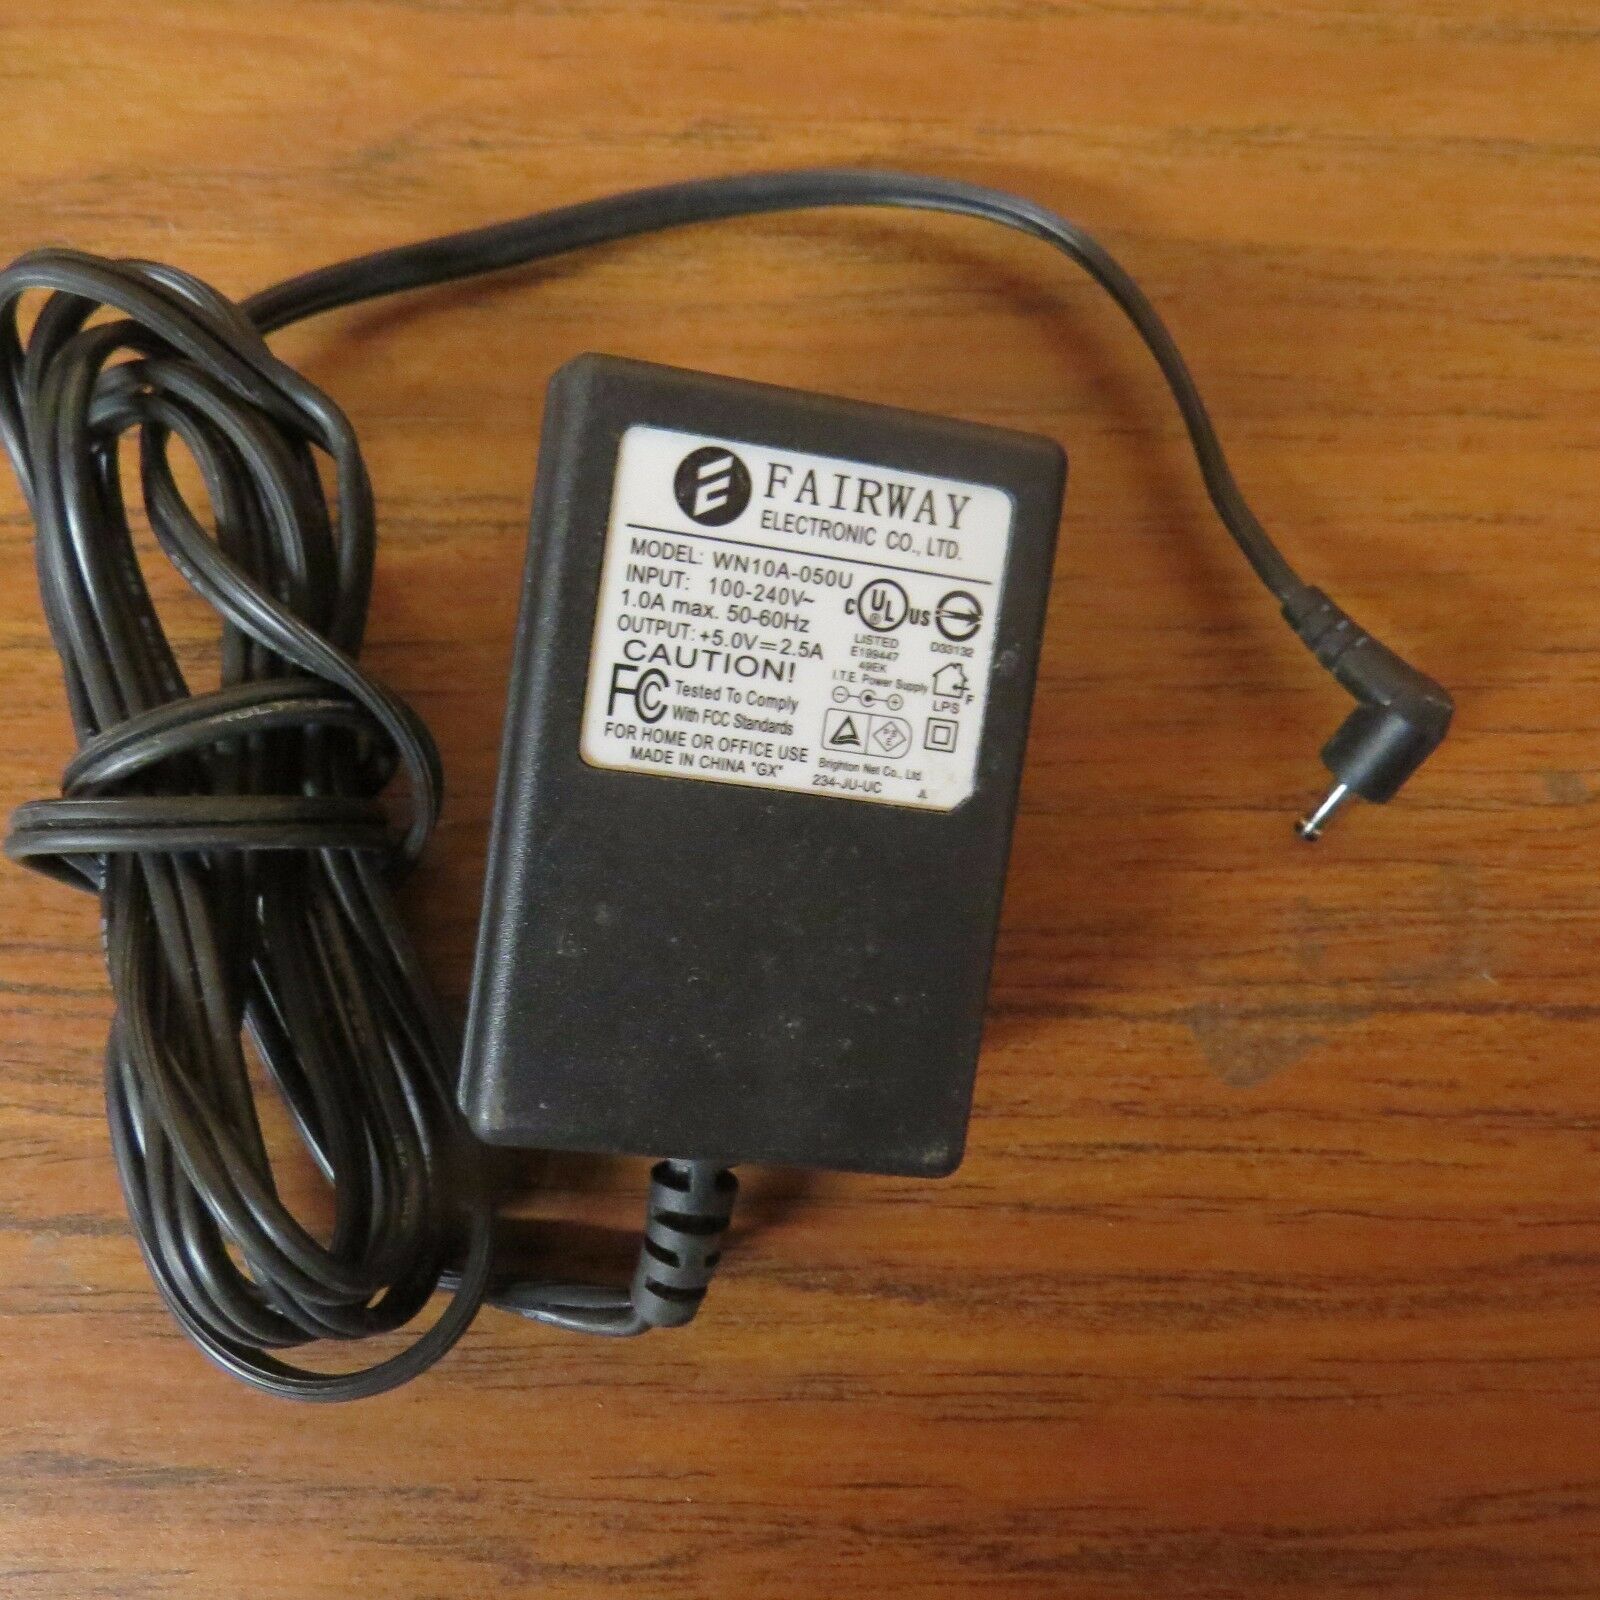 FAIRWAY Model WN10A-050 6V 5v 2.5a AC Adapter Model Number: WN10A-060 Accessory Type: AC adapter Brand: Fairway FAI